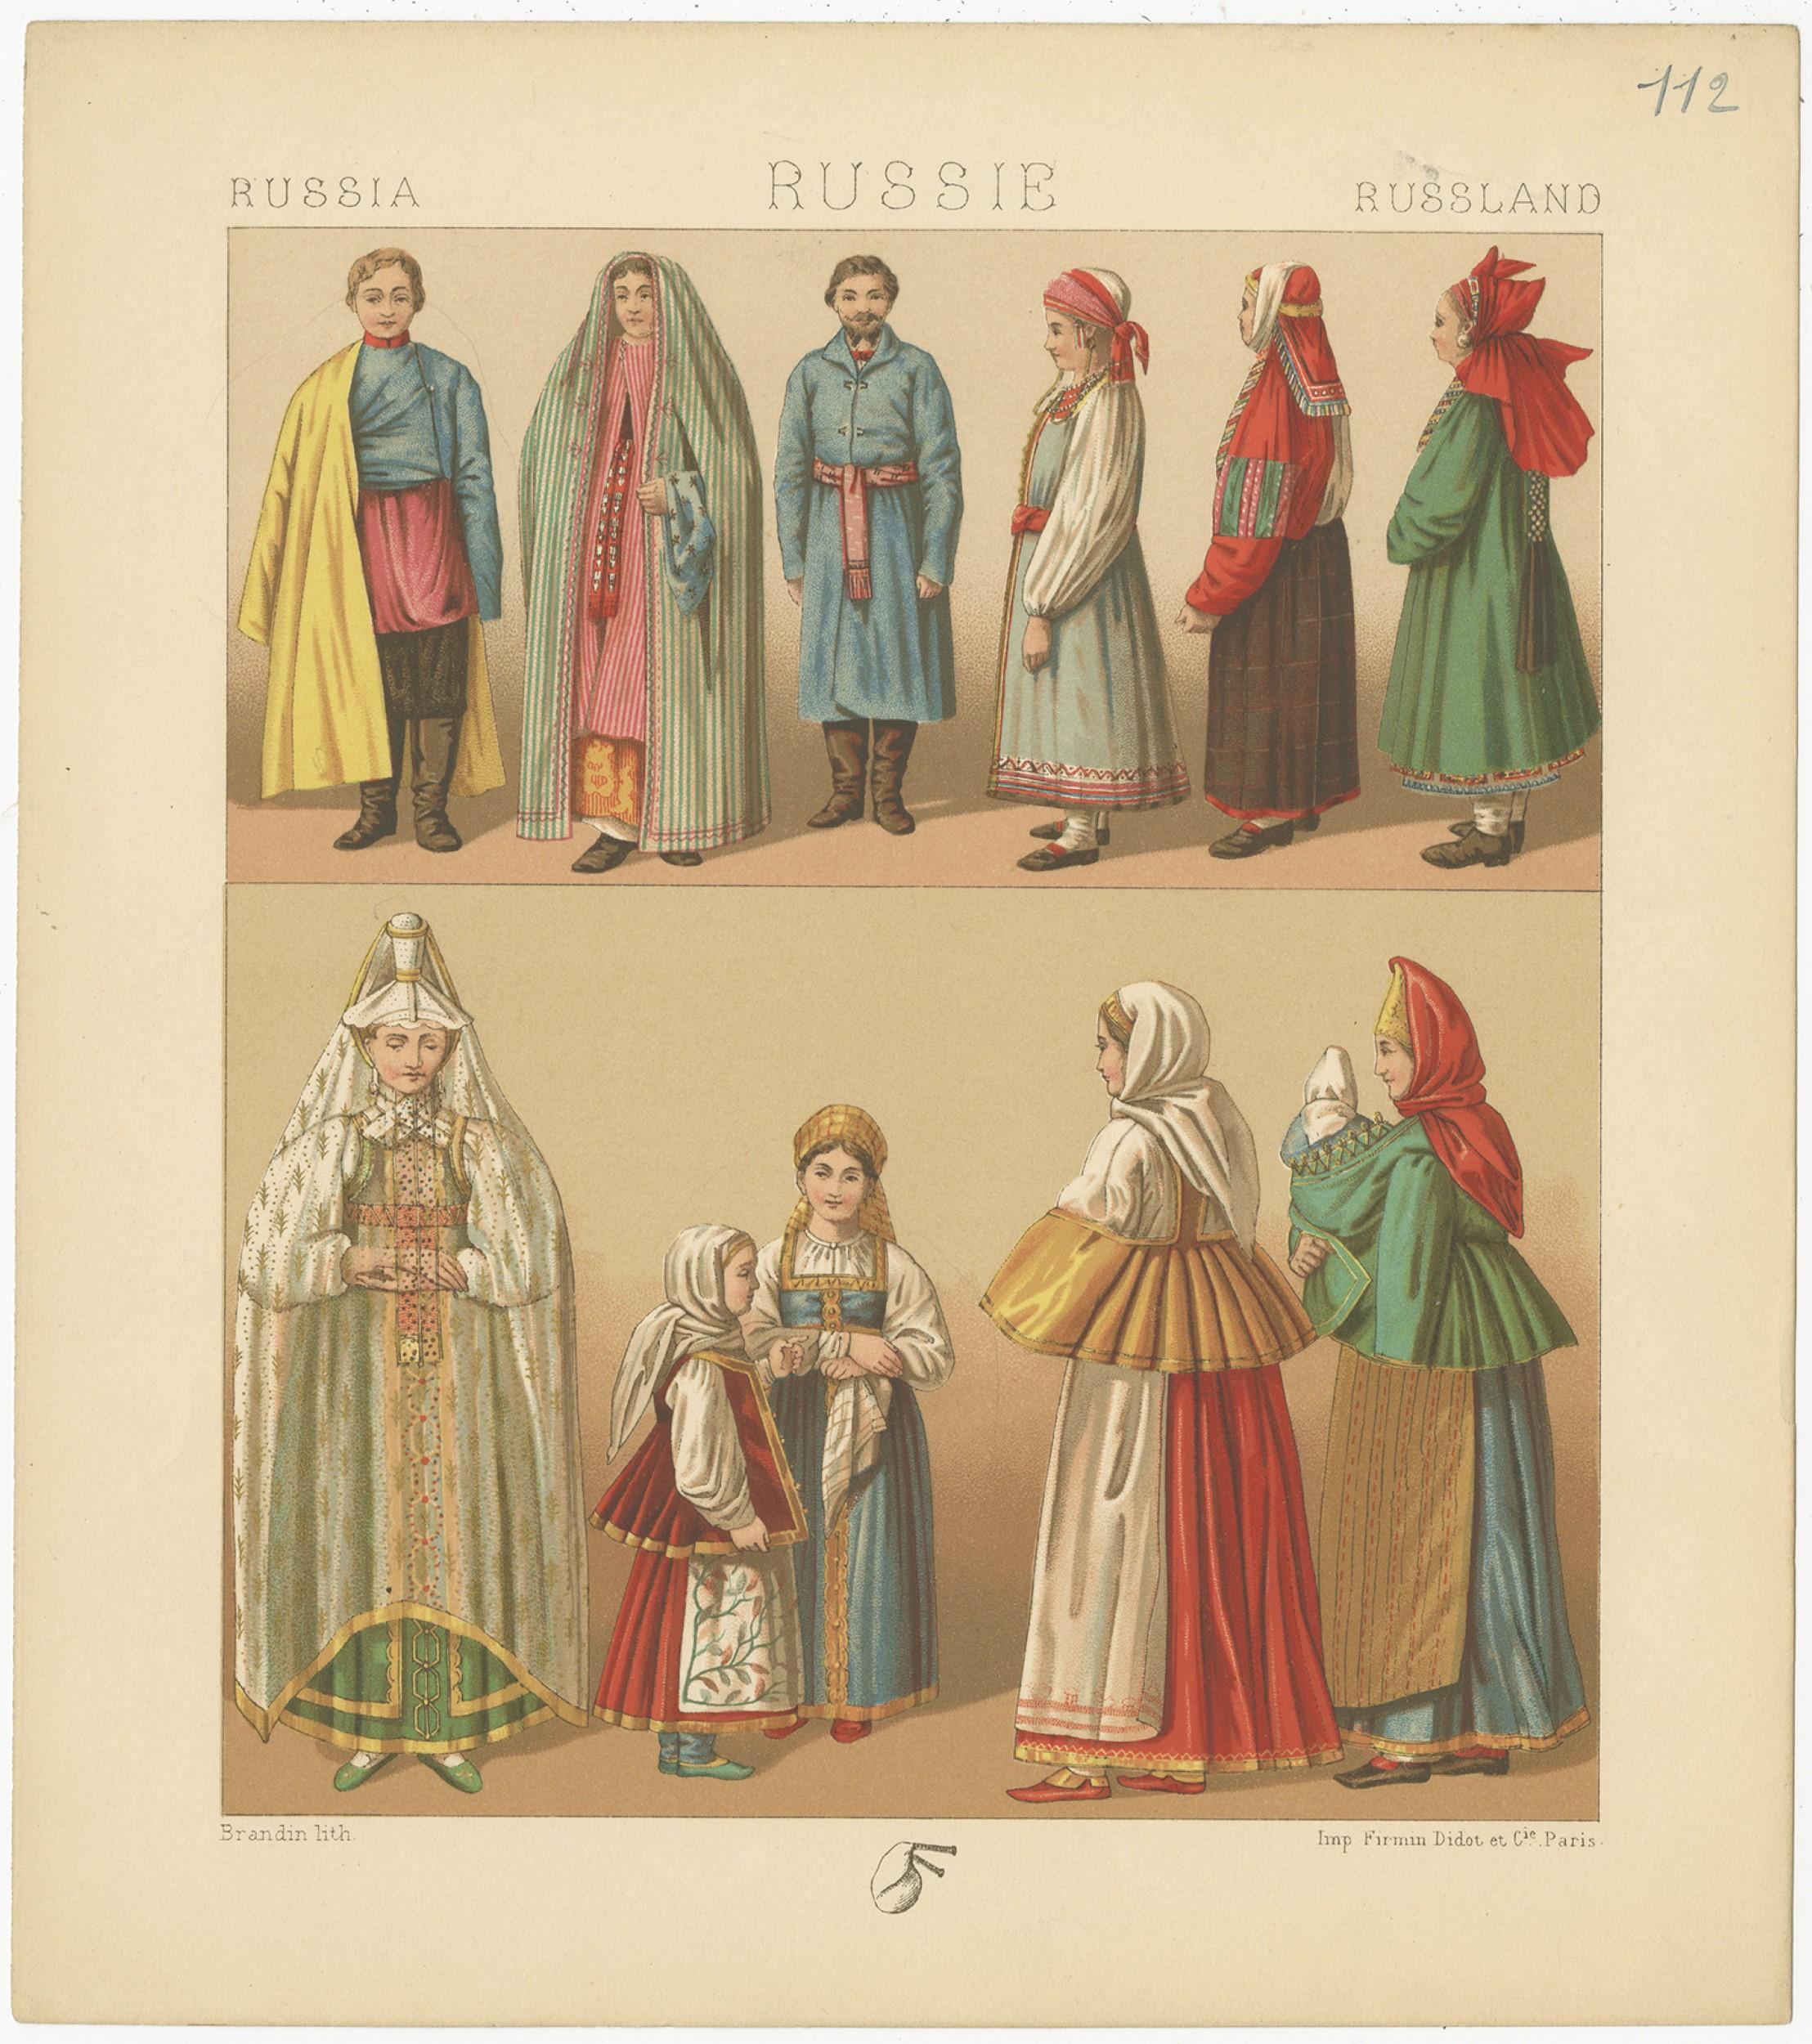 Antique print titled 'Russia - Russie - Russland'. Chromolithograph of Russian Costumes. This print originates from 'Le Costume Historique' by M.A. Racinet. Published, circa 1880.